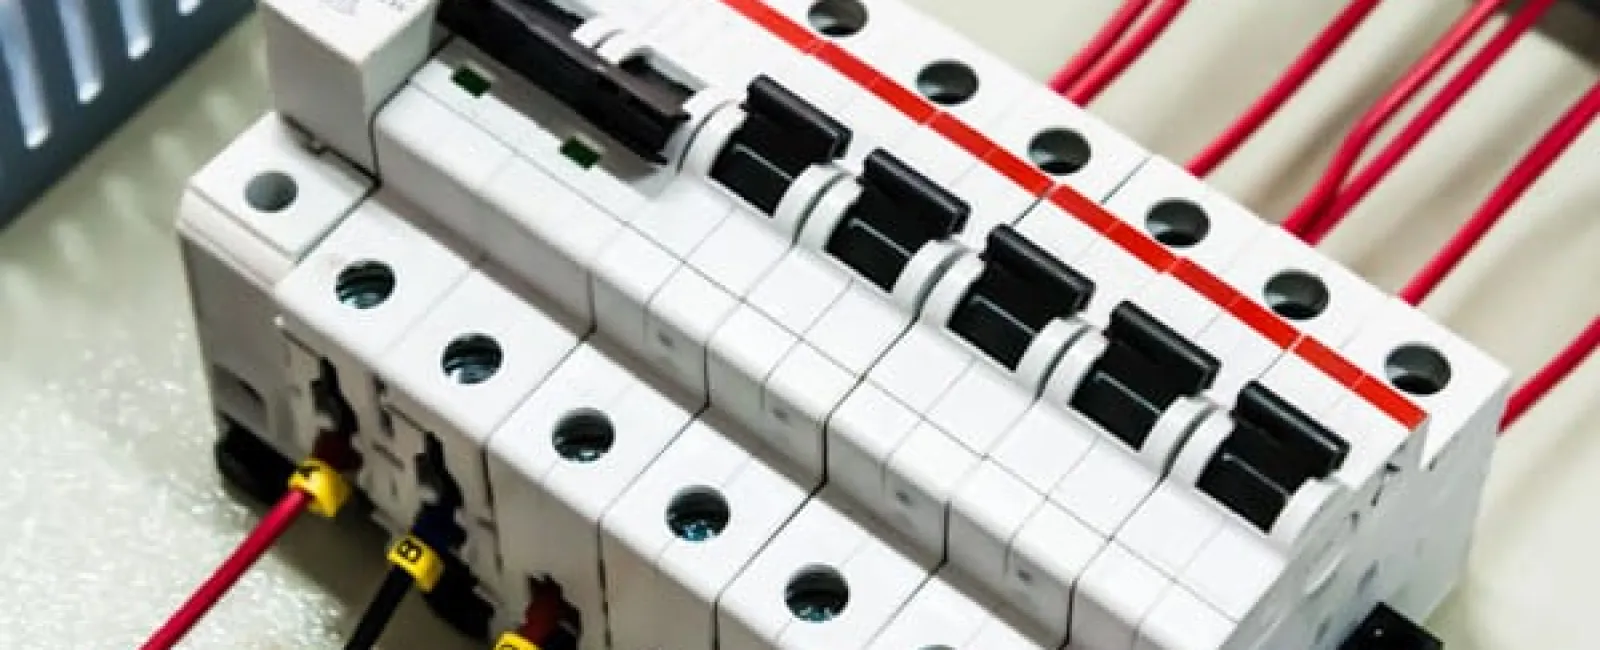 WHY A SURGE PROTECTOR IS A MUST FOR YOUR HOME